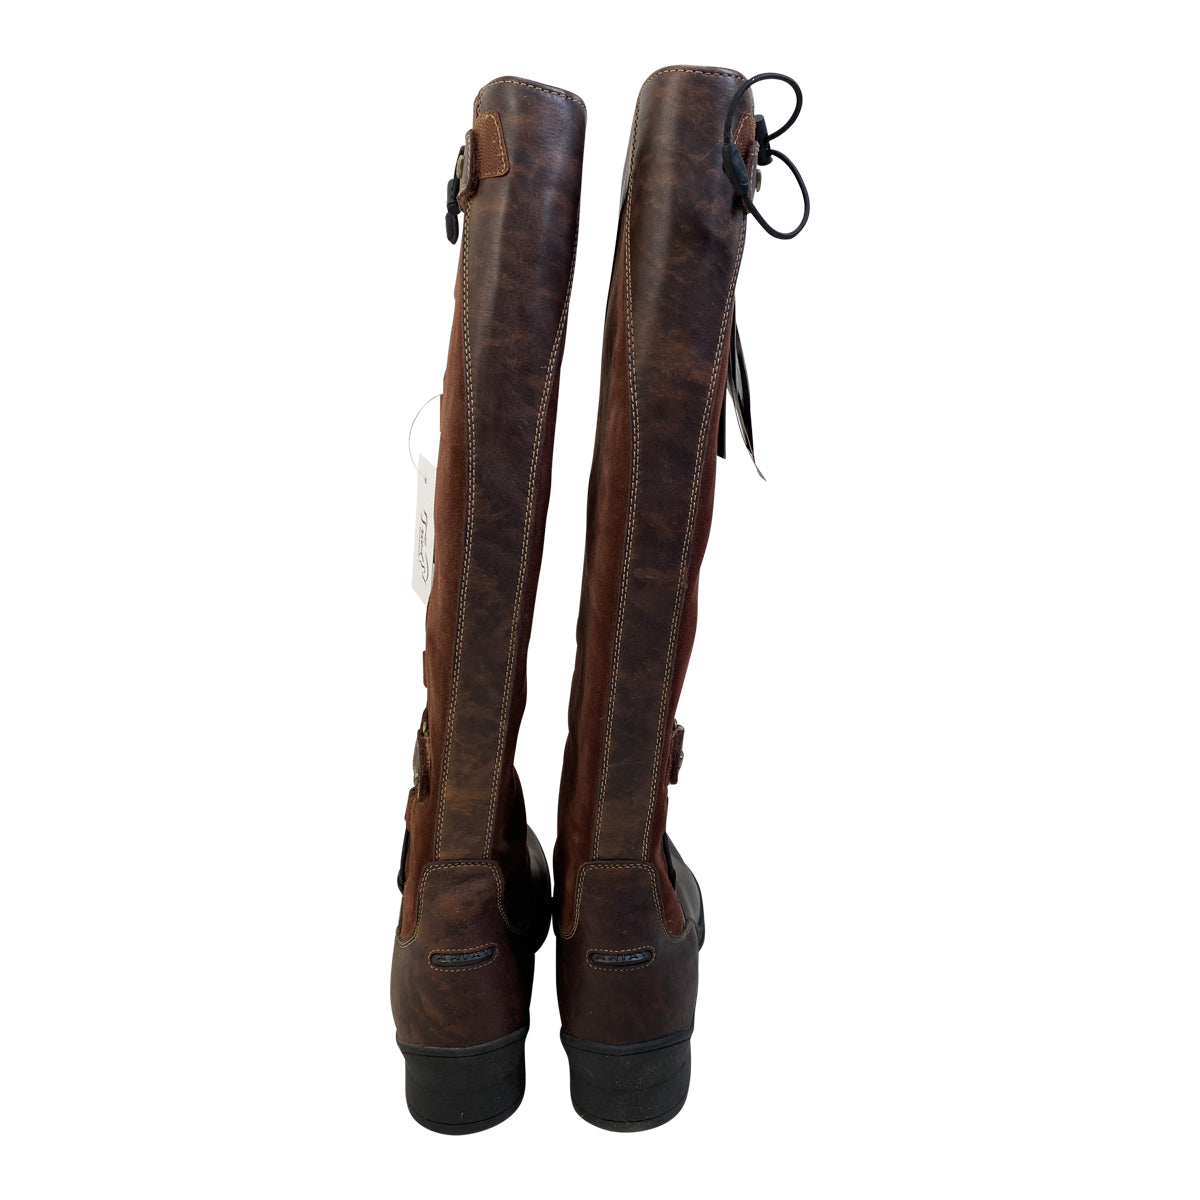 Ariat H2O Waterproof Riding Boots in Brown 